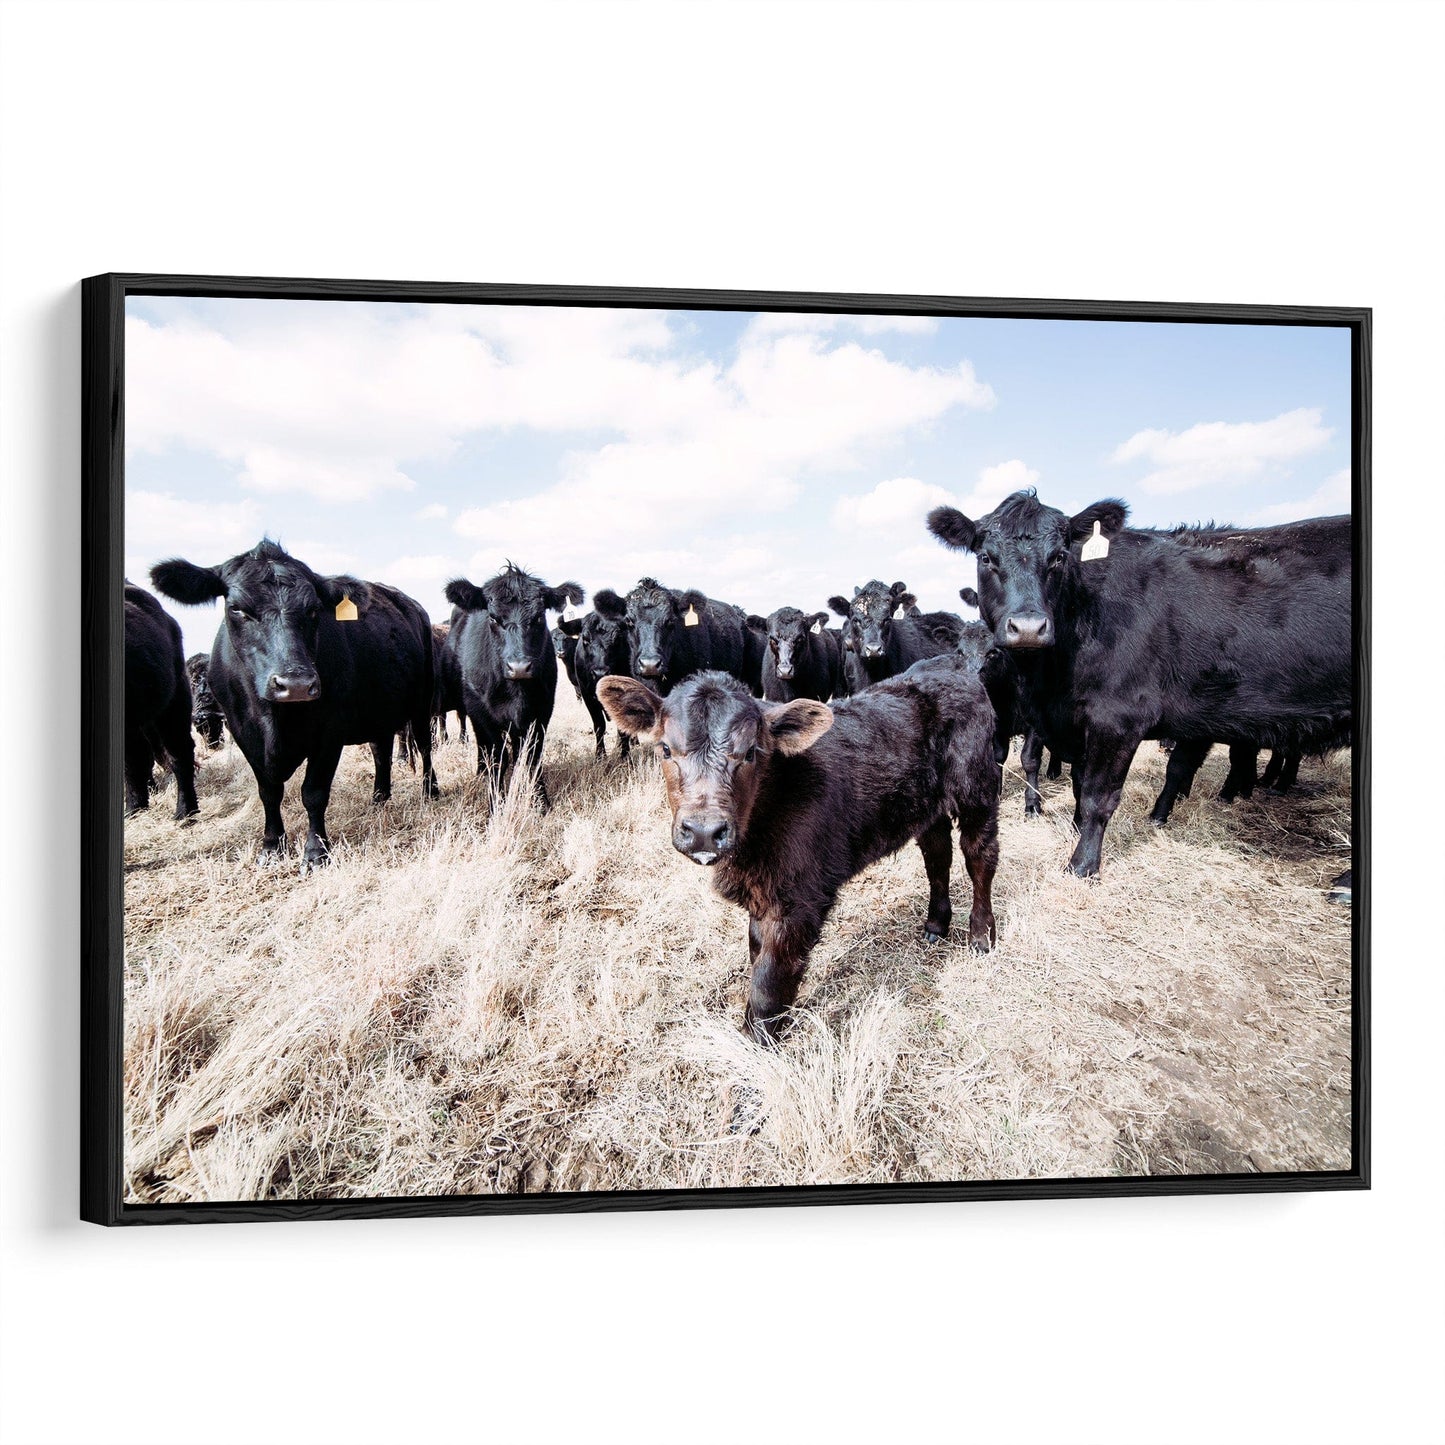 Ranch Style Black Angus Cattle - Angus Cows and Calf Canvas-Black Frame / 12 x 18 Inches Wall Art Teri James Photography